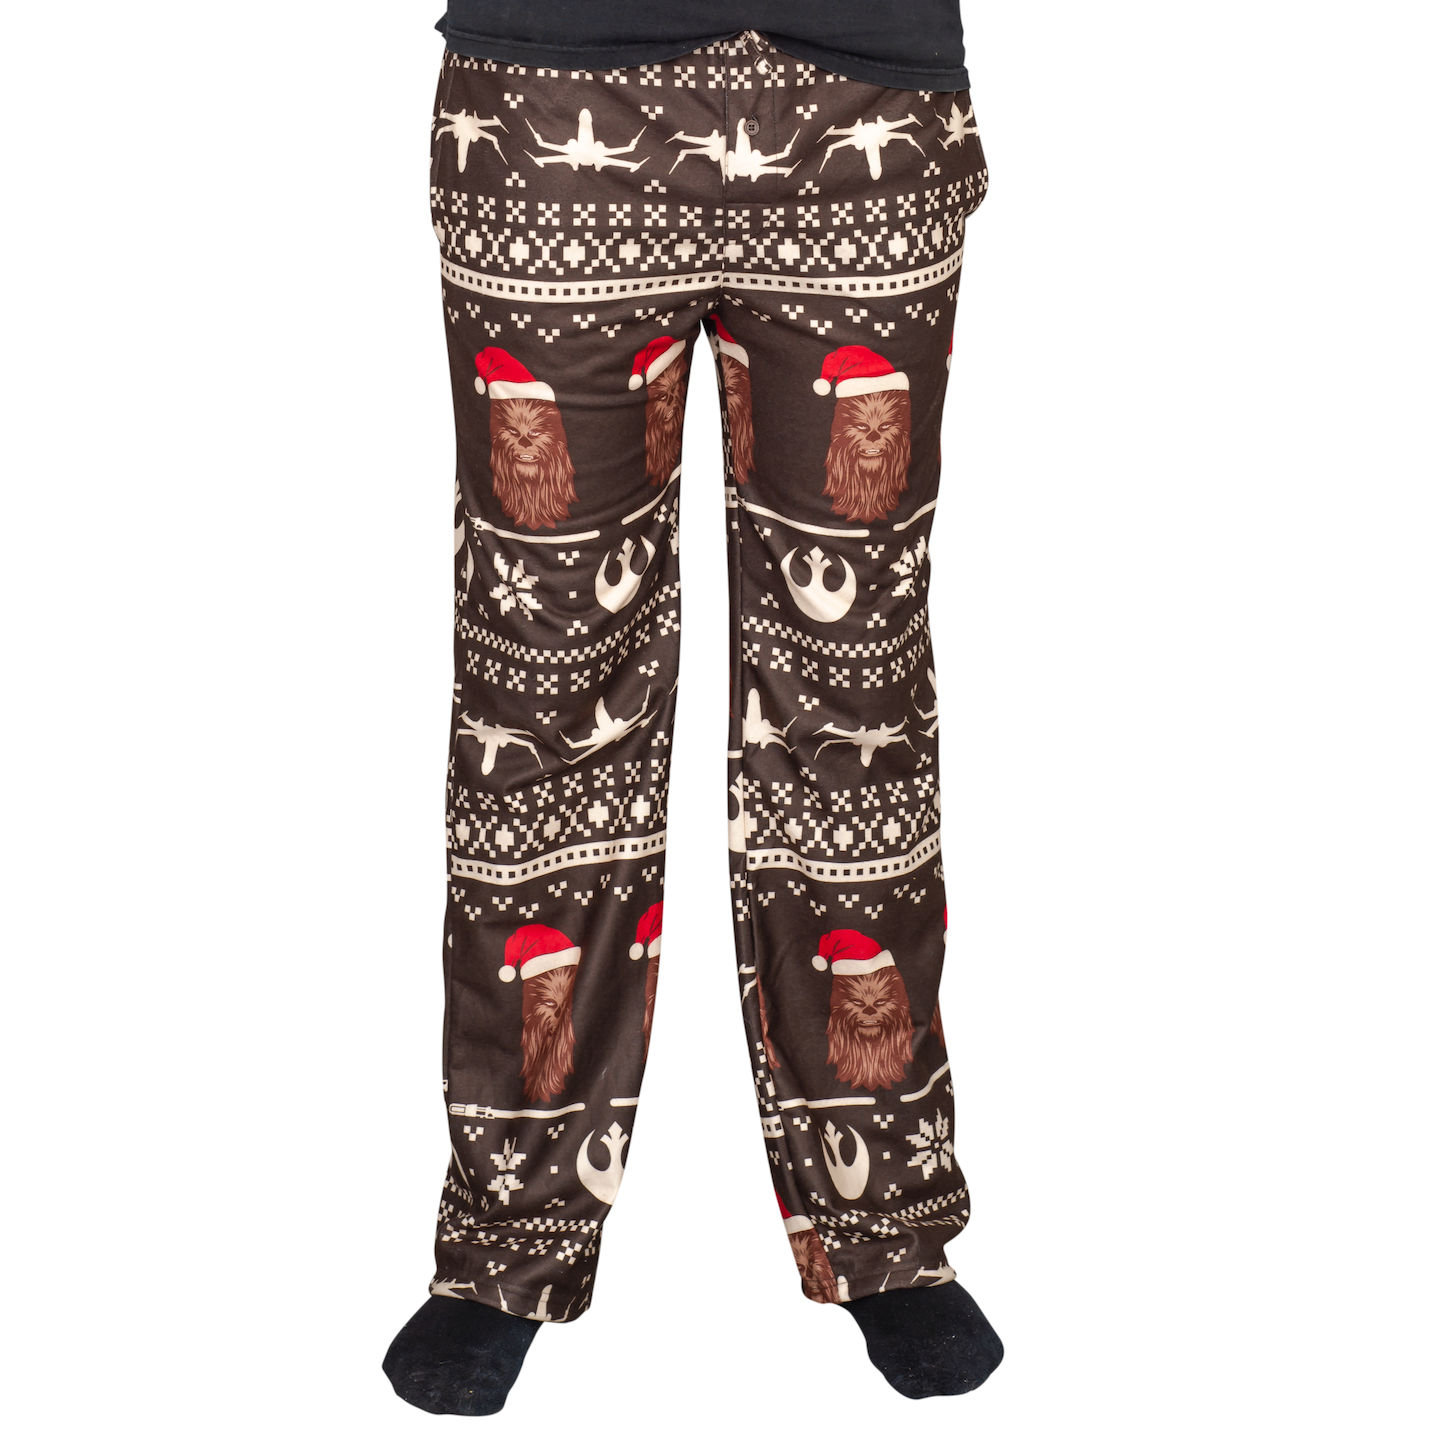 Star Wars Chewbacca Ships Christmas Lounge Pants,Ugly Christmas Sweaters | Funny Xmas Sweaters for Men and Women